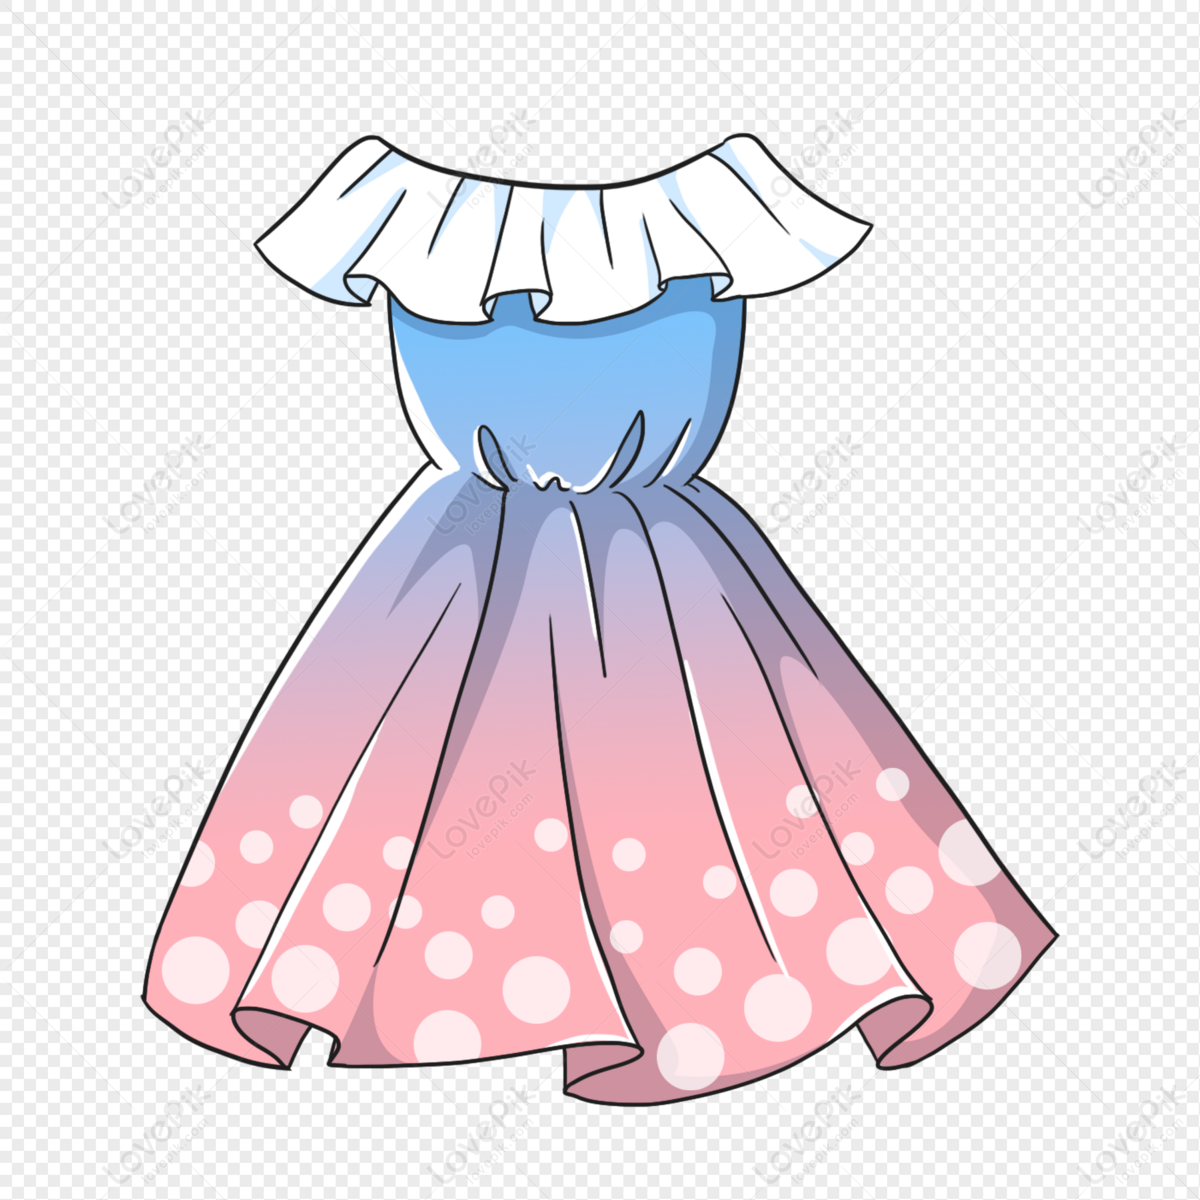 Summer Cute Girl Dress PNG Transparent Image And Clipart Image For Free  Download - Lovepik | 401143007